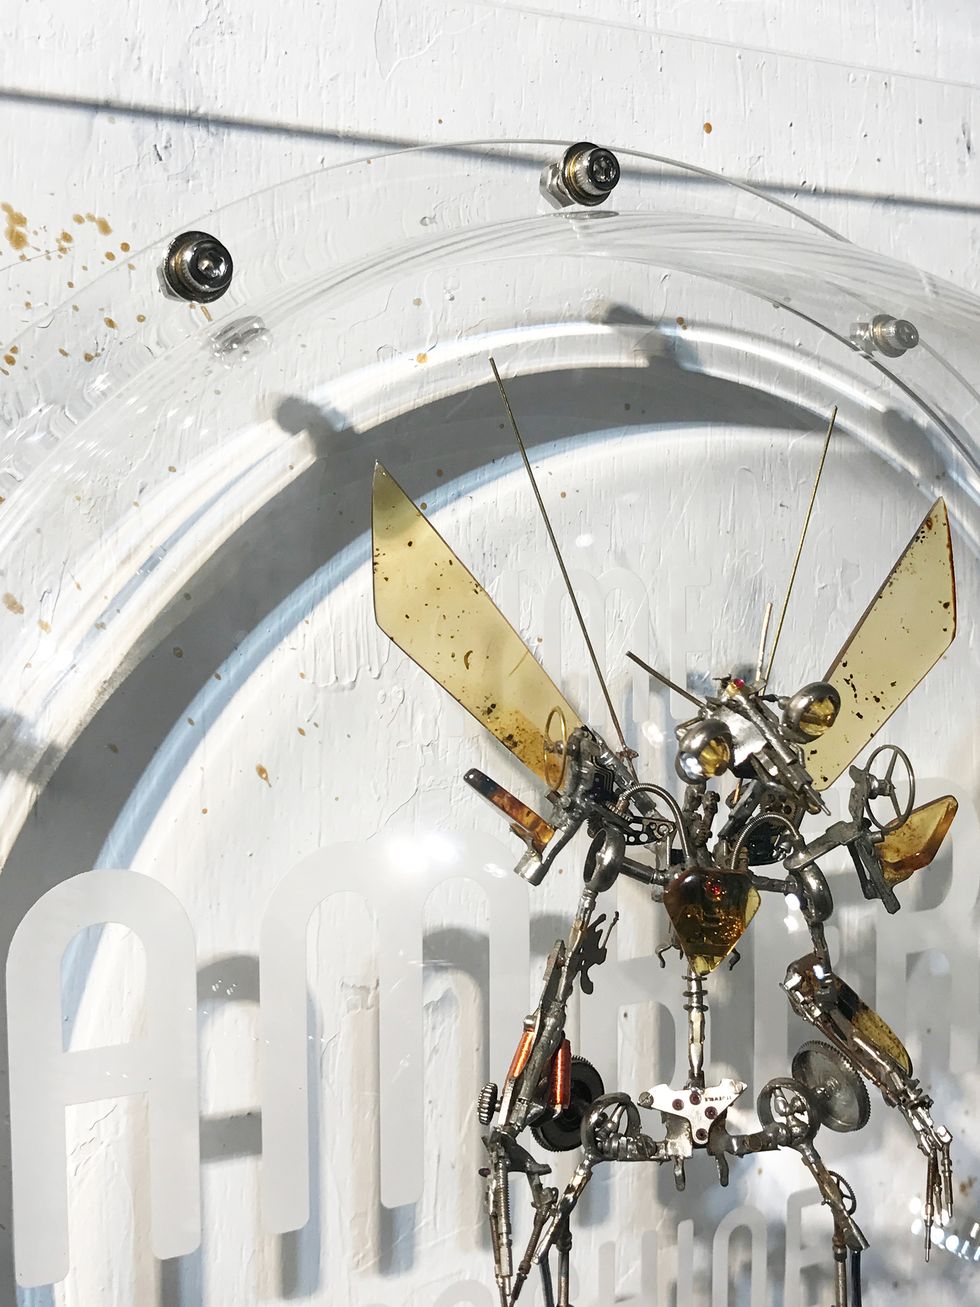 Architecture, Clock, Space, Insect, Ceiling, Wheel, Arch, 